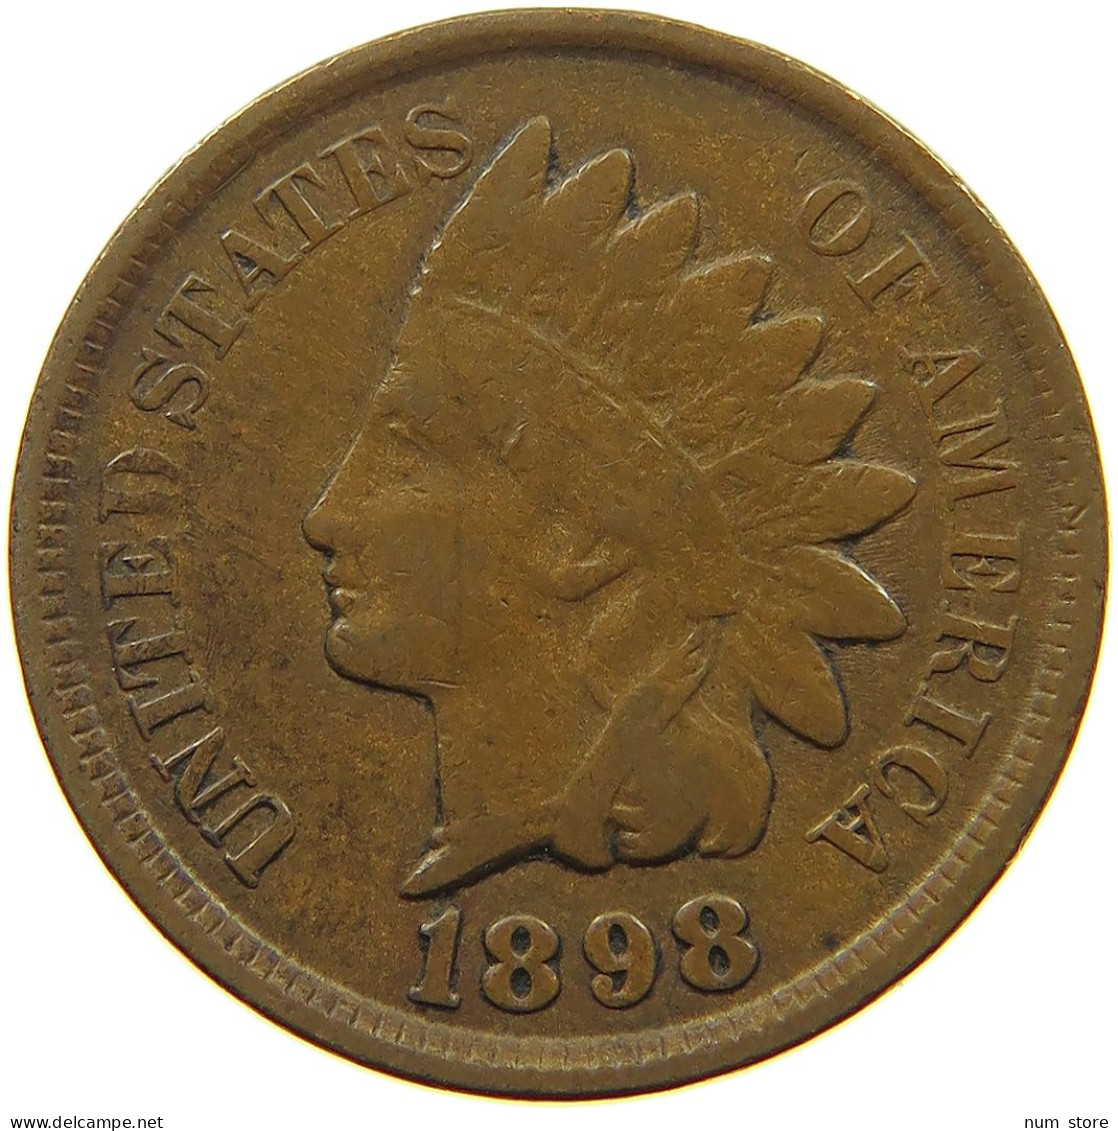 UNITED STATES OF AMERICA CENT 1898 INDIAN HEAD #a094 0295 - 1859-1909: Indian Head